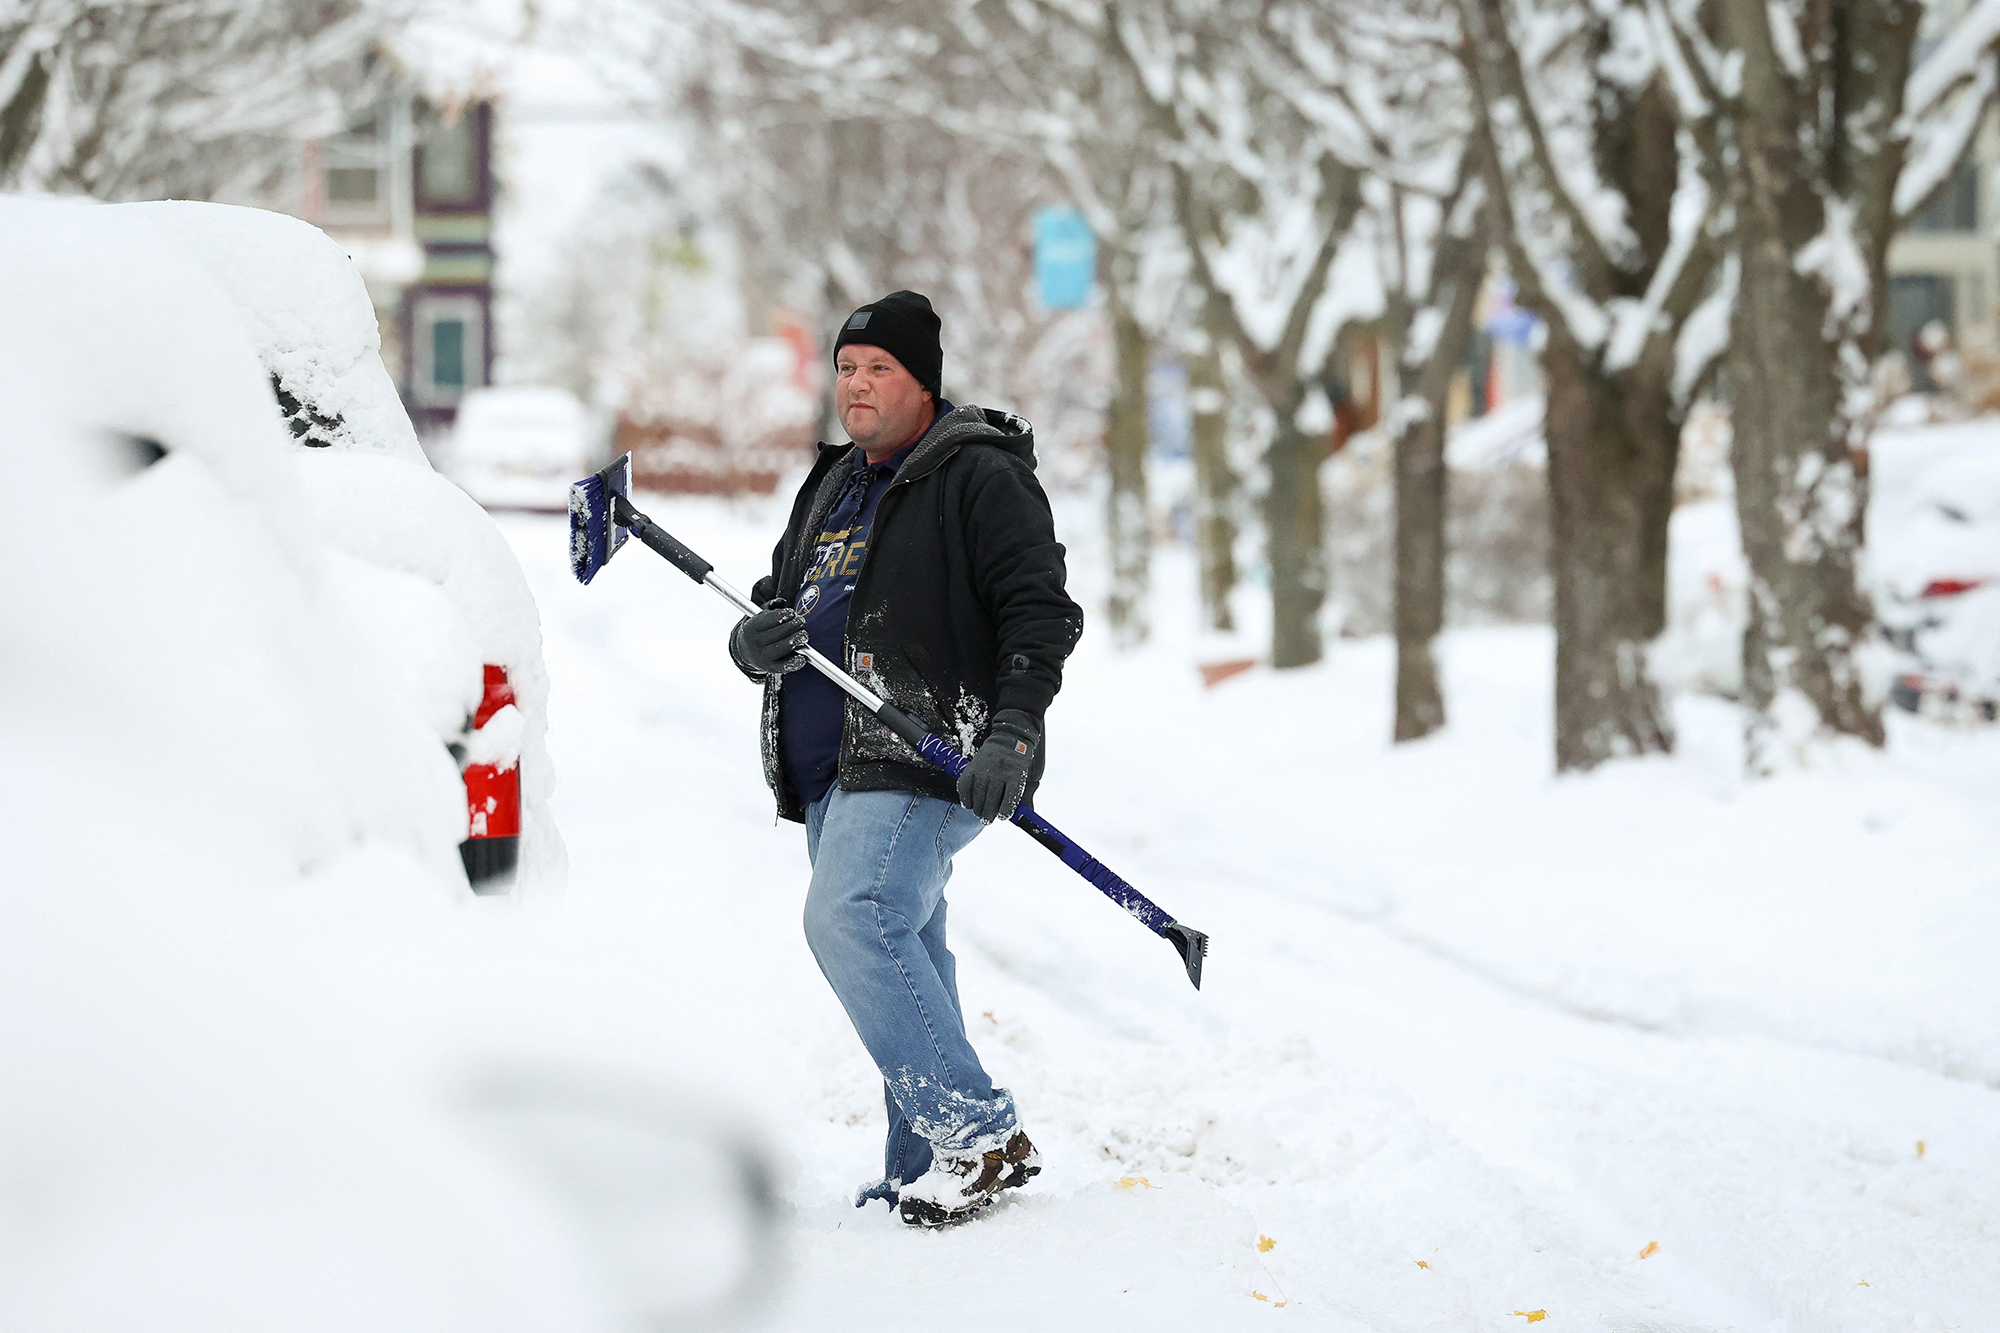 A resident cleans a vehicle on the street during a snowstorm as extreme winter weather hits Buffalo, New York, Friday.